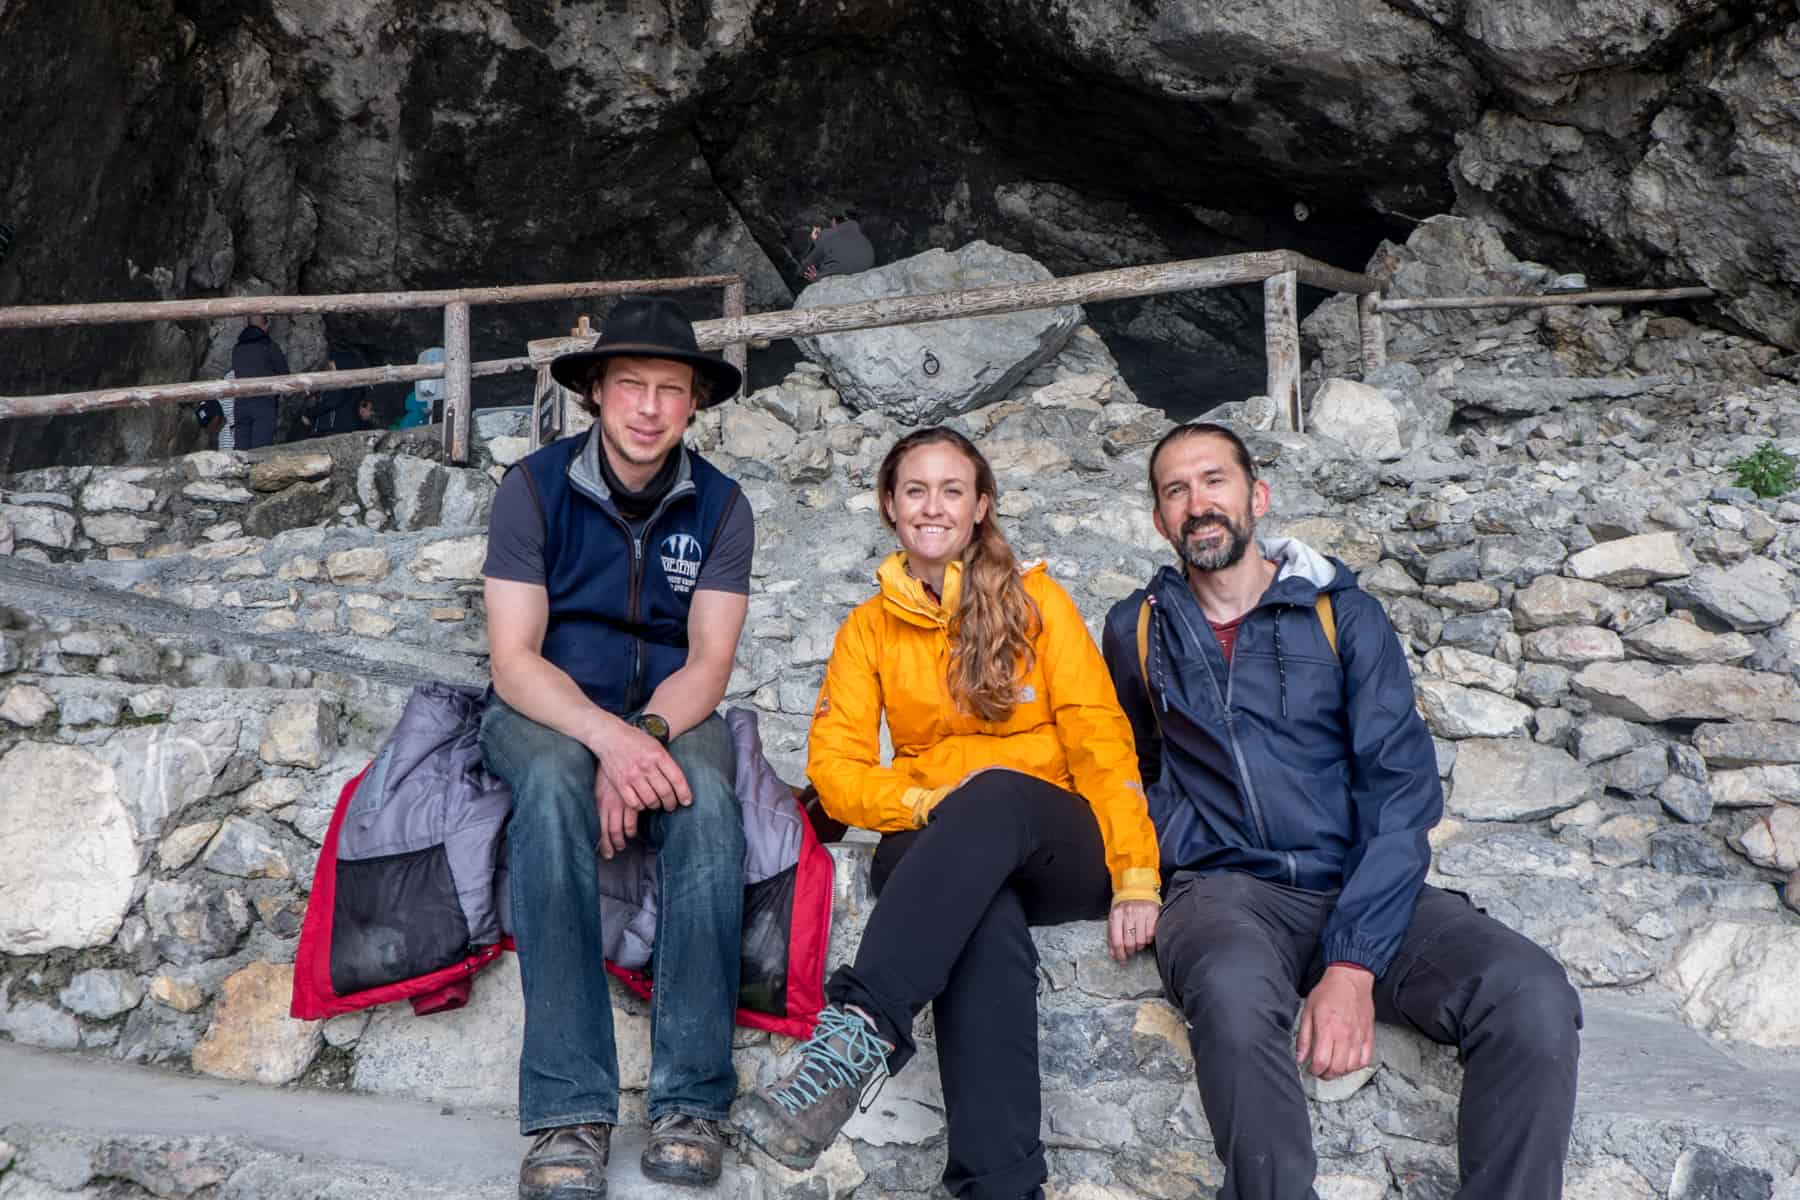 A guide from the Eisriesenwelt cave sits with a woman in orange and a man in blue outside the rocky entrance to the Eisriesenwelt ice cave in Austria